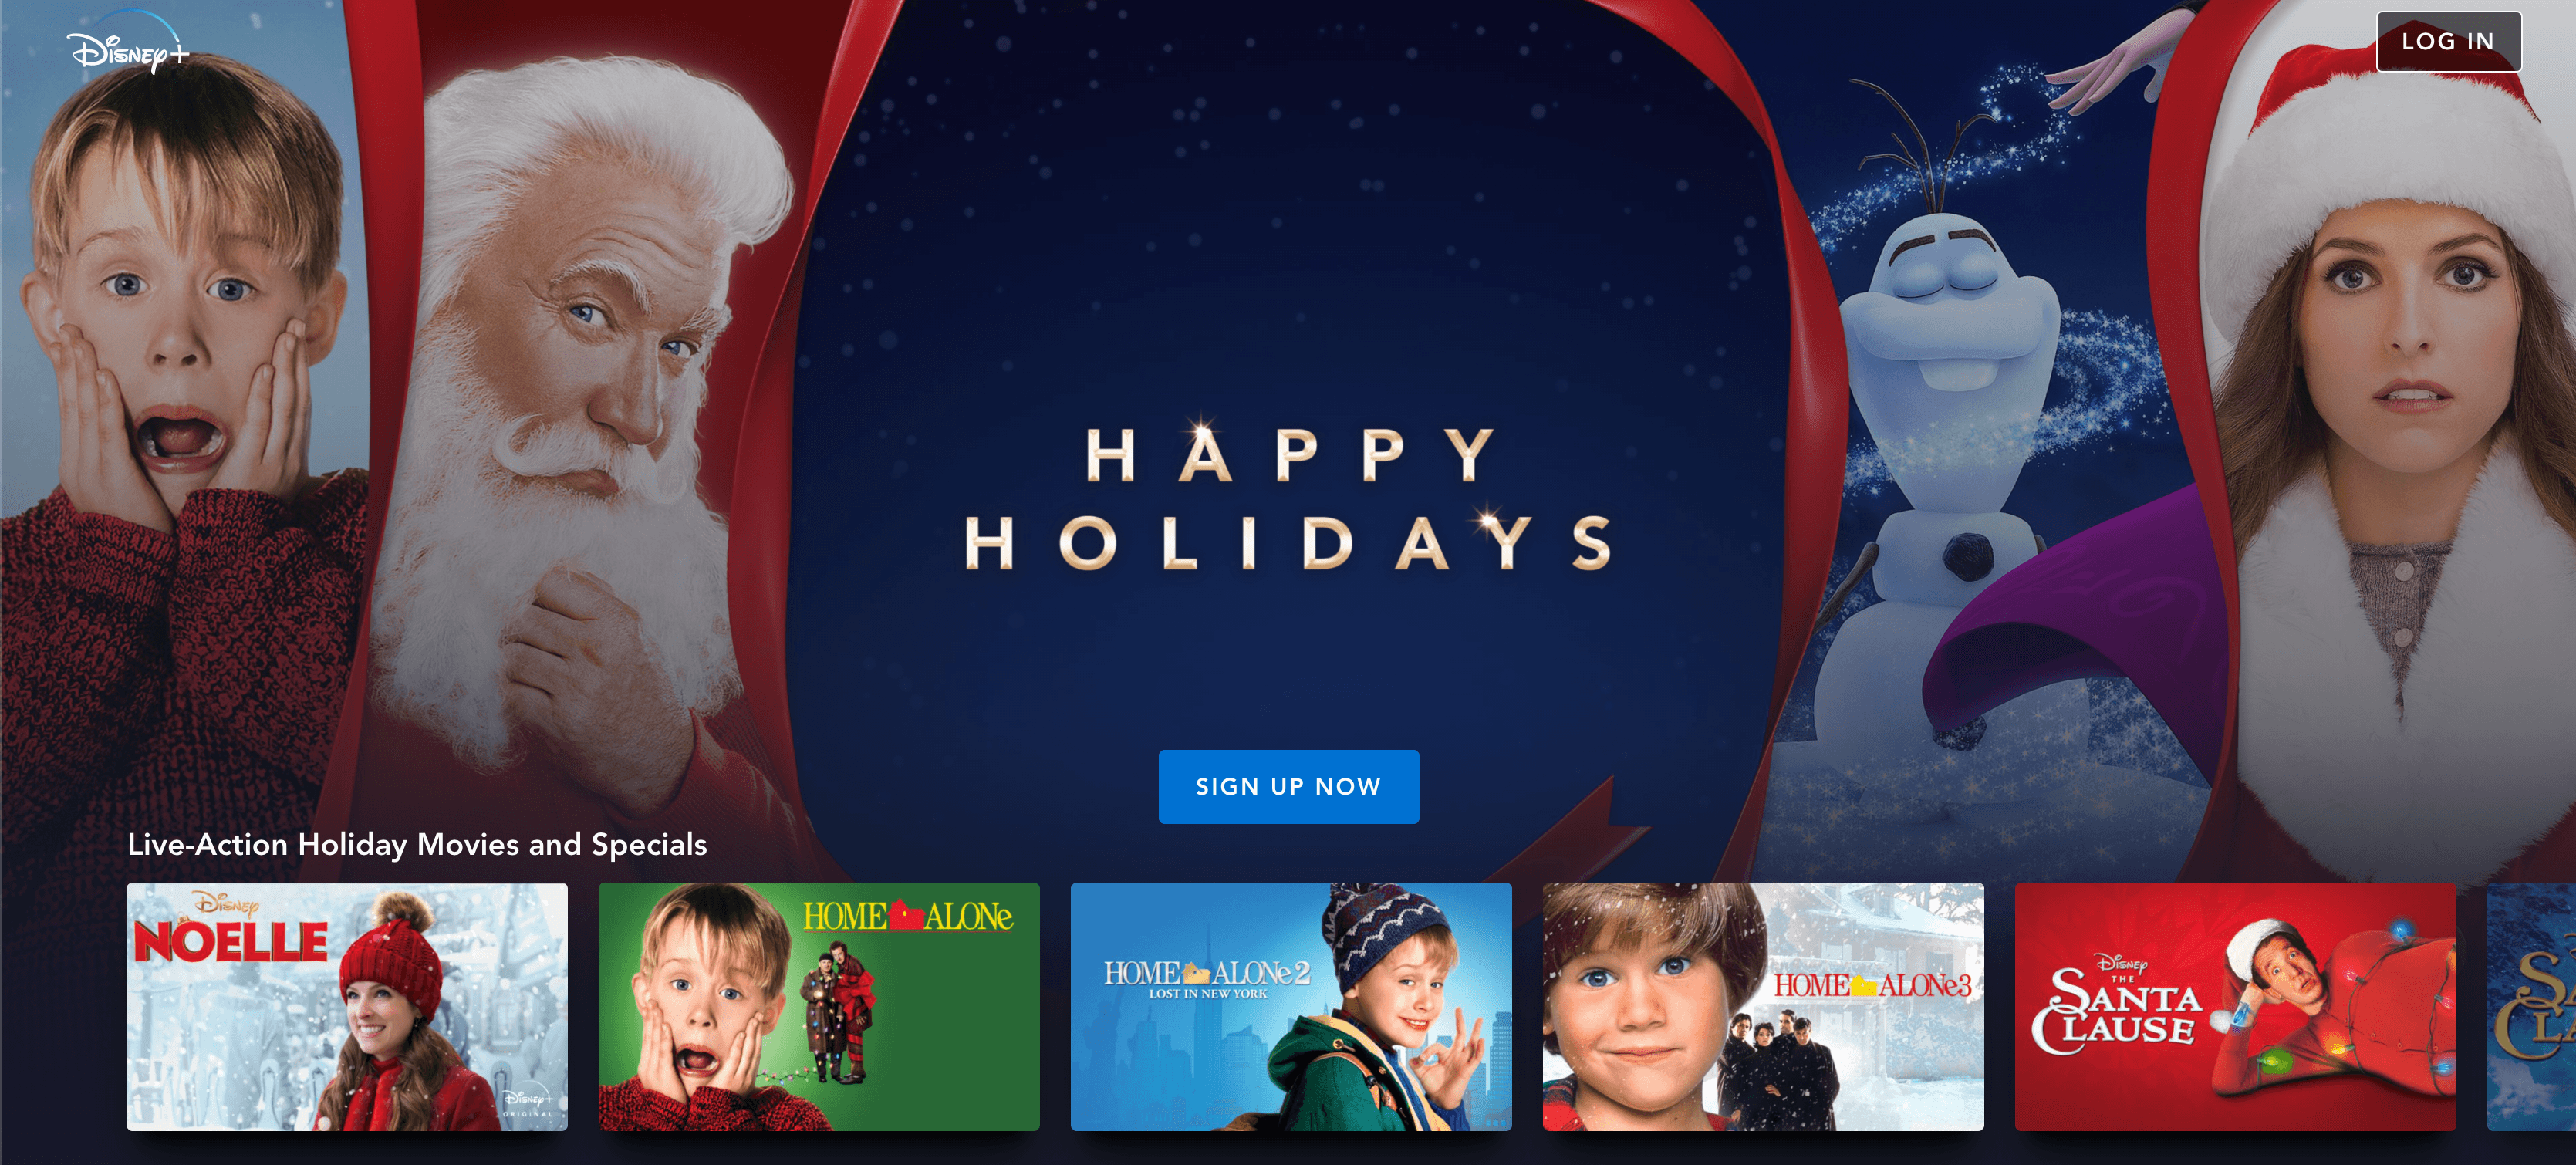 Disney+ Adds a Happy Holidays Collection of Christmas Movies and Episodes